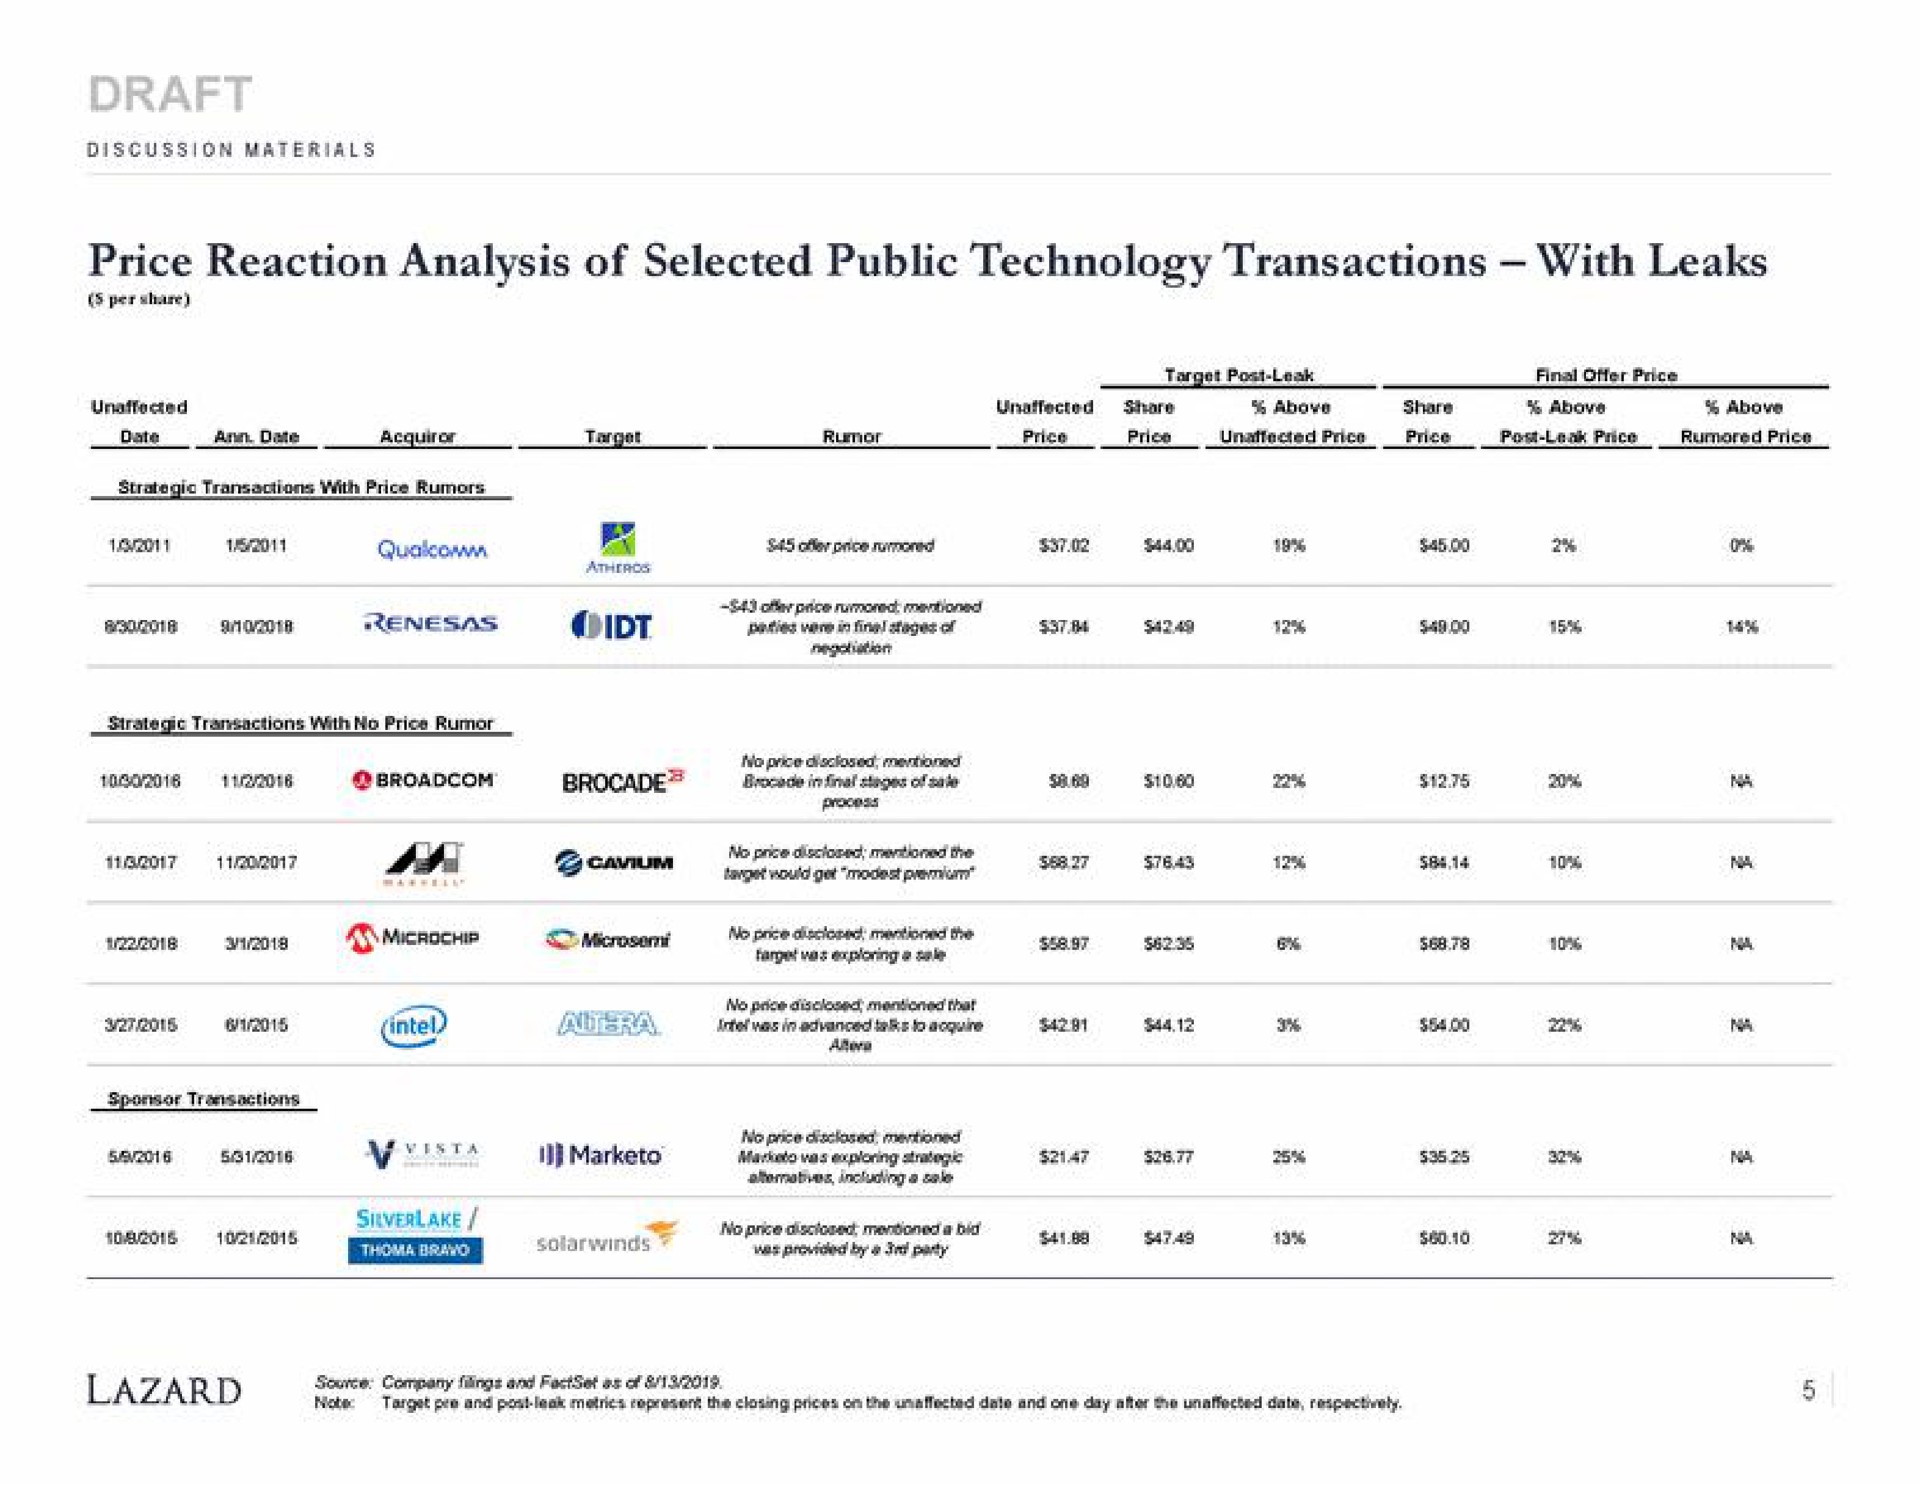 price reaction analysis of selected public technology transactions with leaks | Lazard